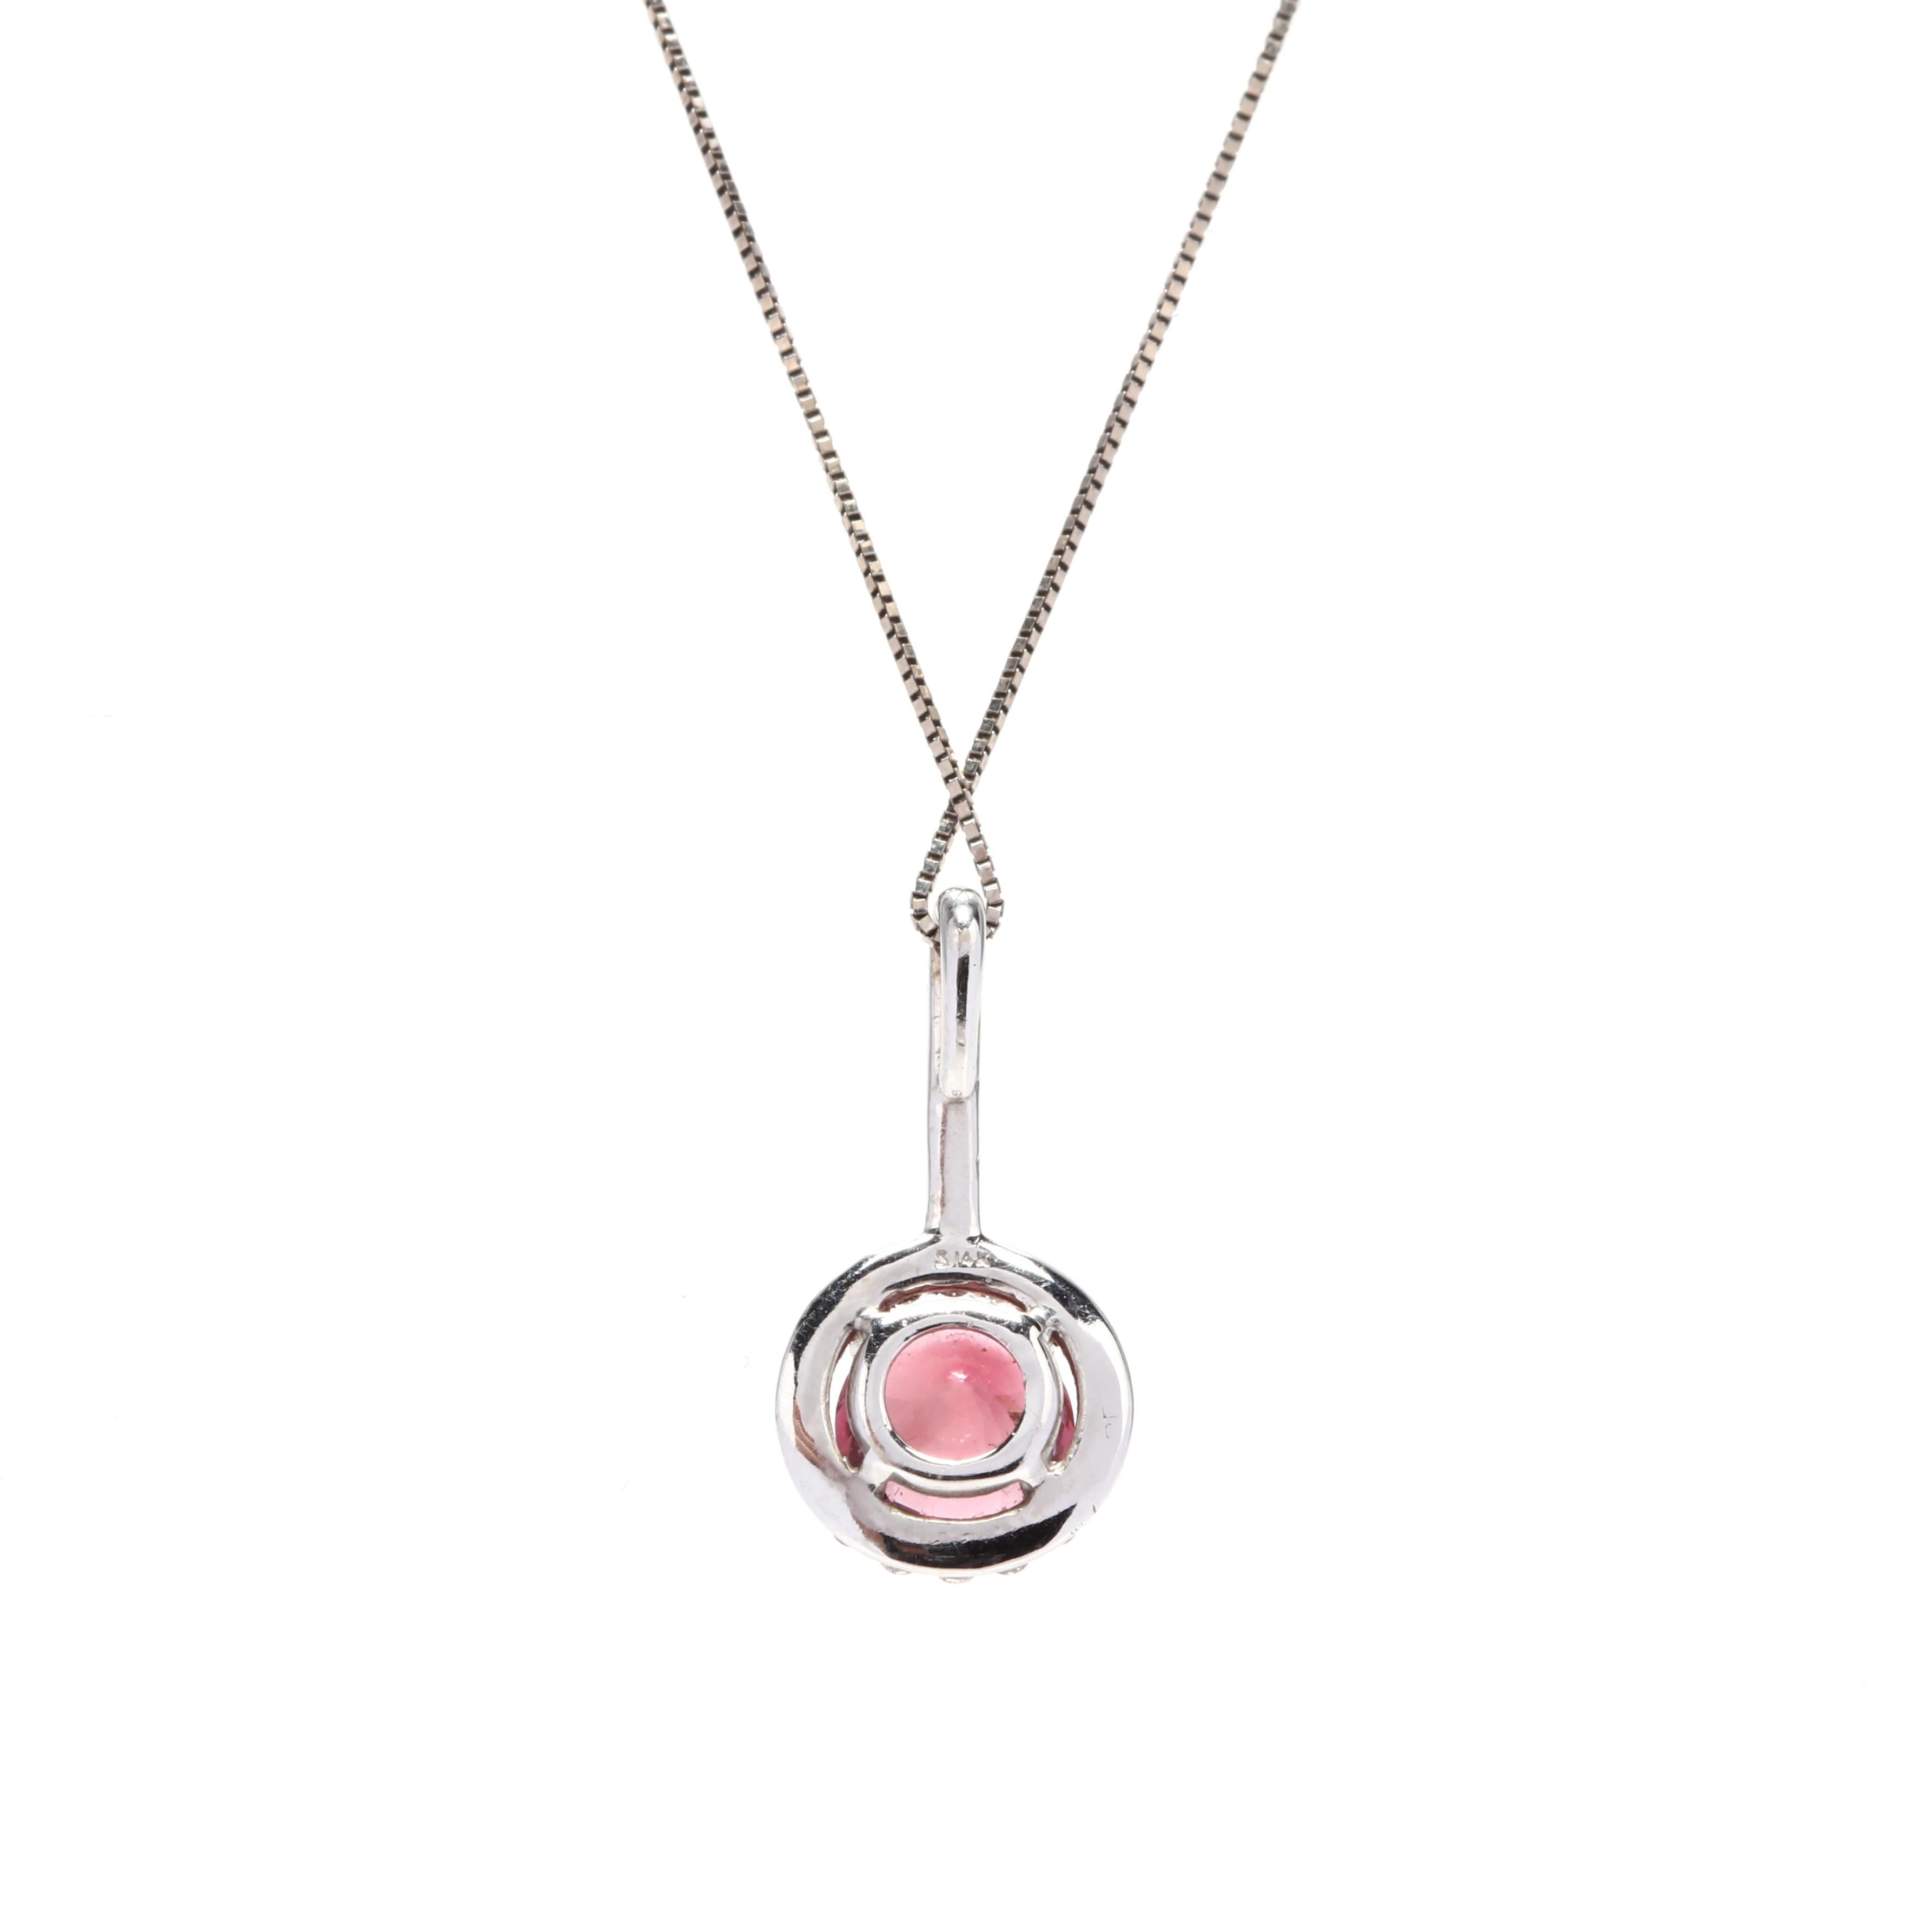 A 14 karat white gold, pink tourmaline, and diamond pendant necklace. A prong set, round cut pink tourmaline surrounded by a halo of round full cut diamonds and with a diamond bail and a thin box chain.

Stones:
- pink tourmaline, 1 stone
- round